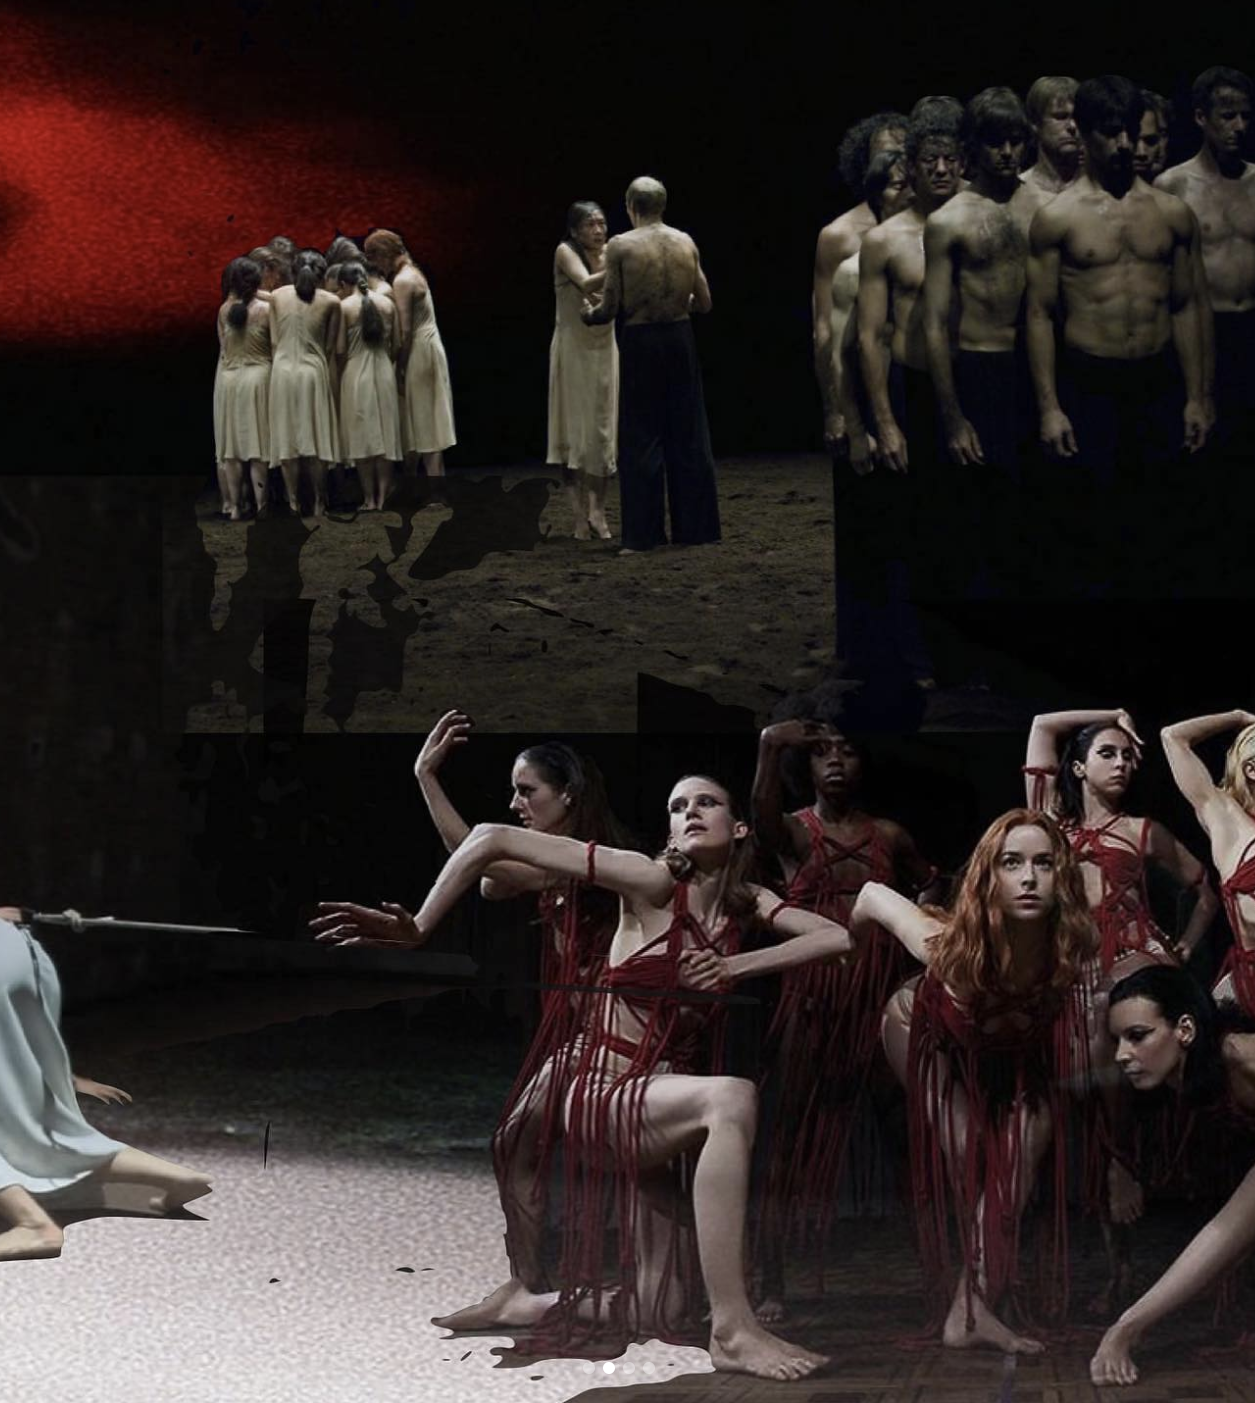 Collage of dance performers in creepy costumes.